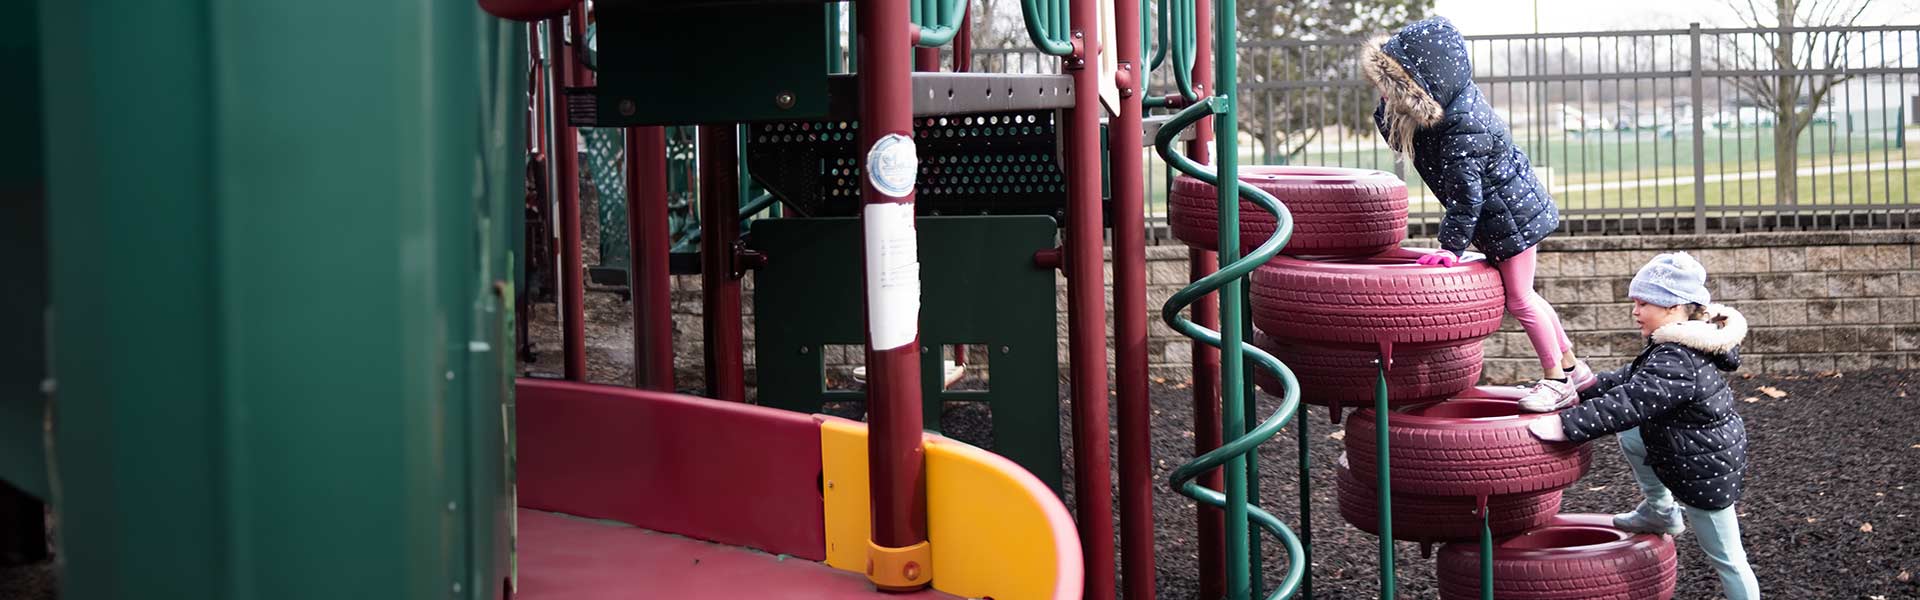 A group of small children playing on a pink and green playground